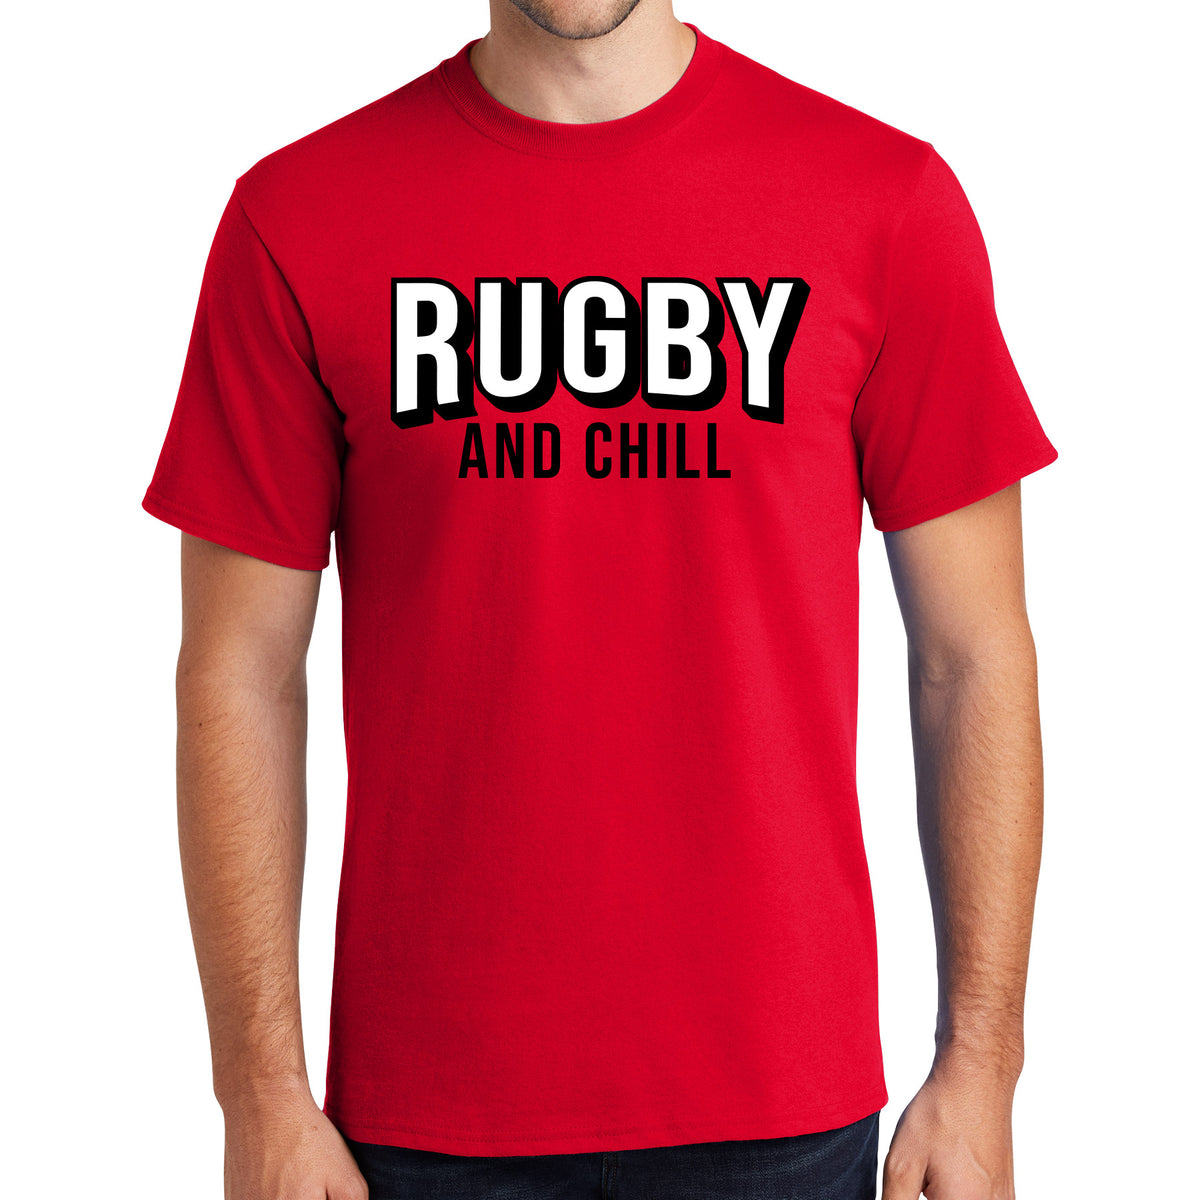 Shop High-Quality Rugby Graphic Tees at Rhino Rugby.